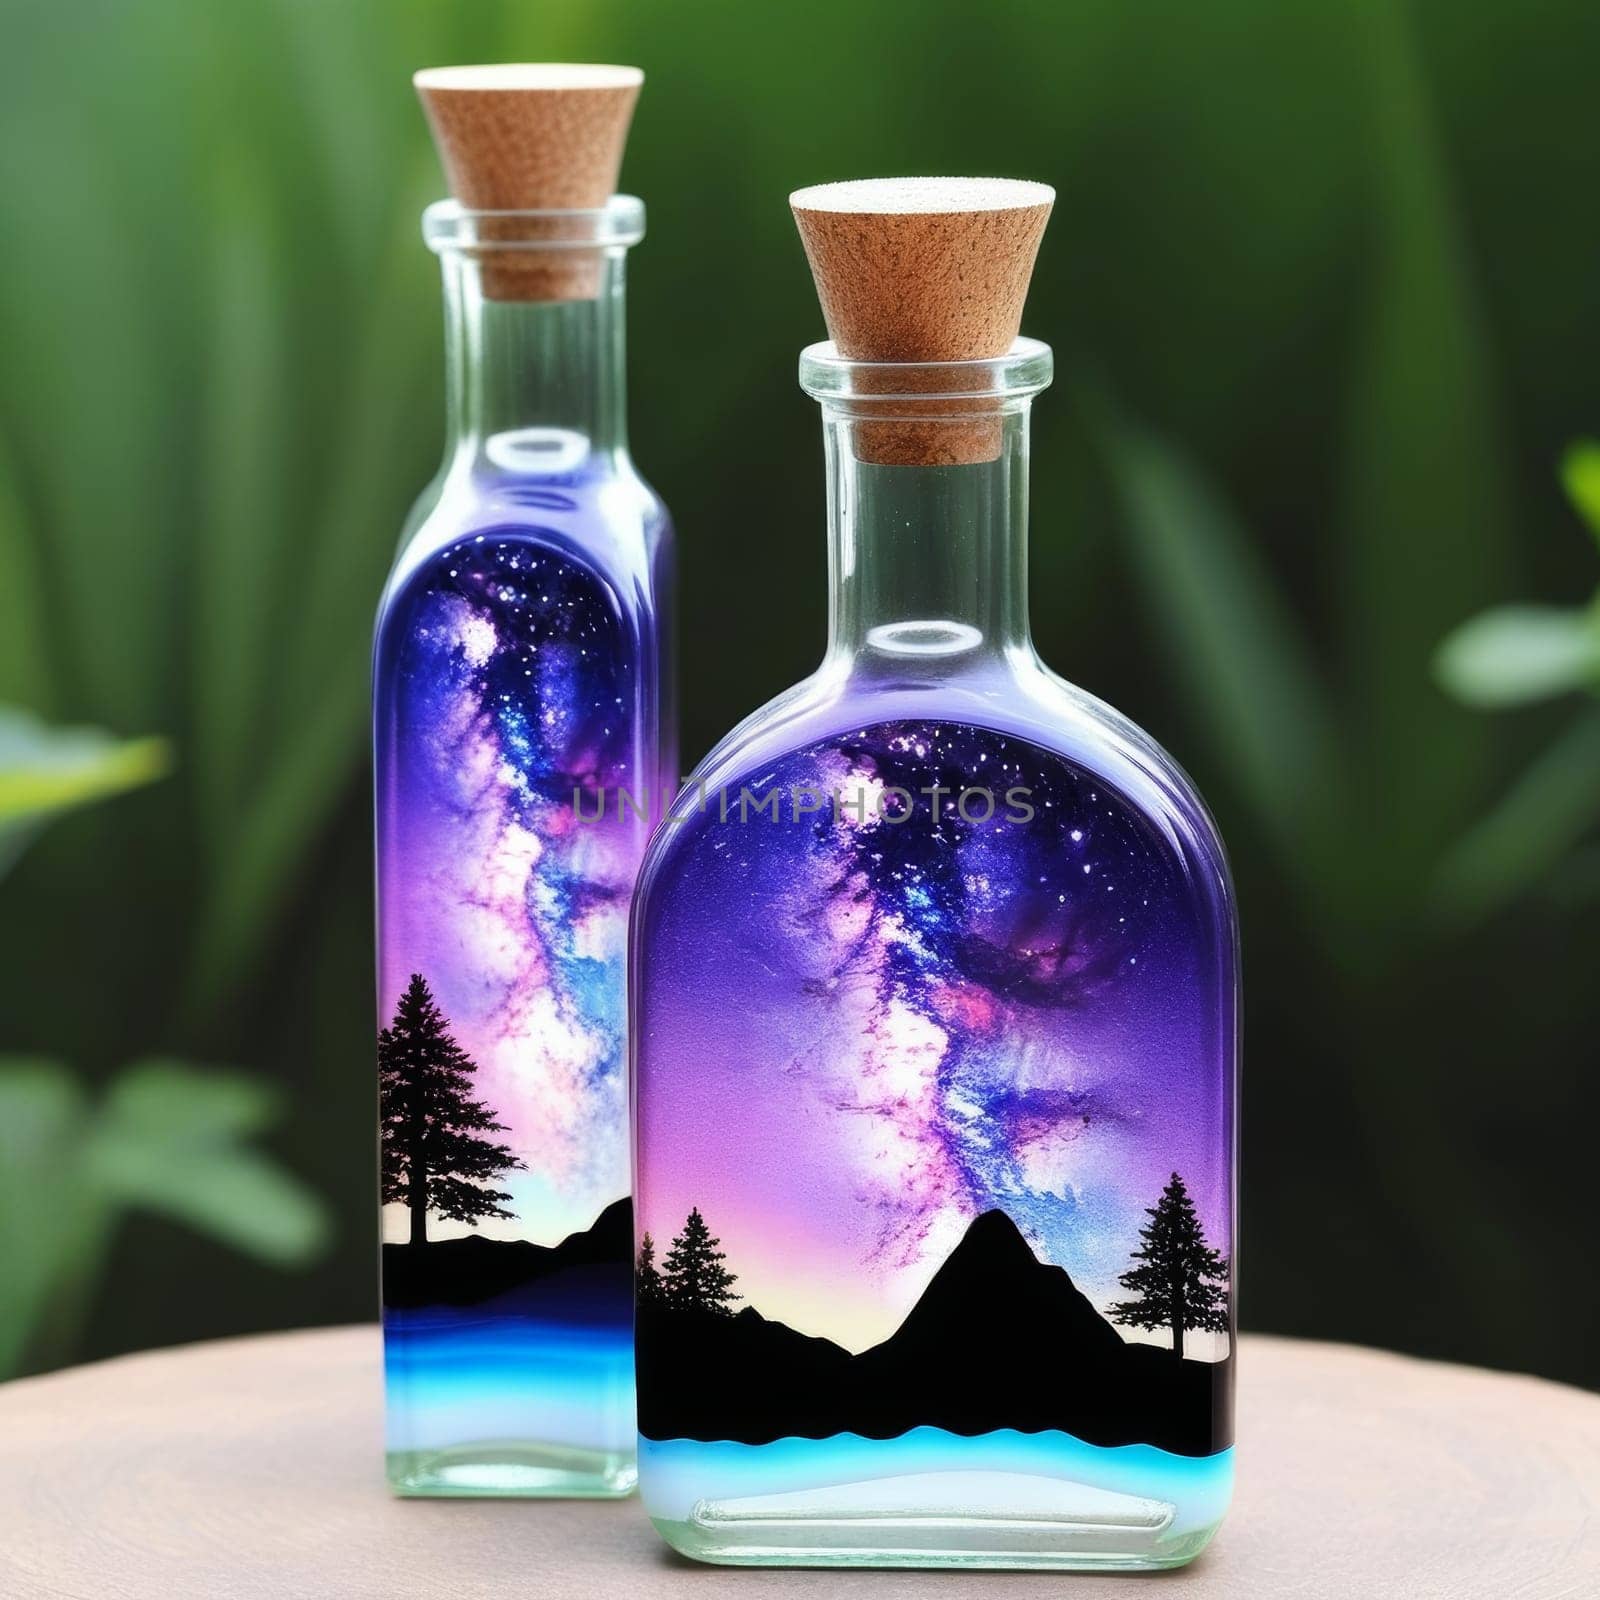 mountains and milky way in a bottle by Andre1ns